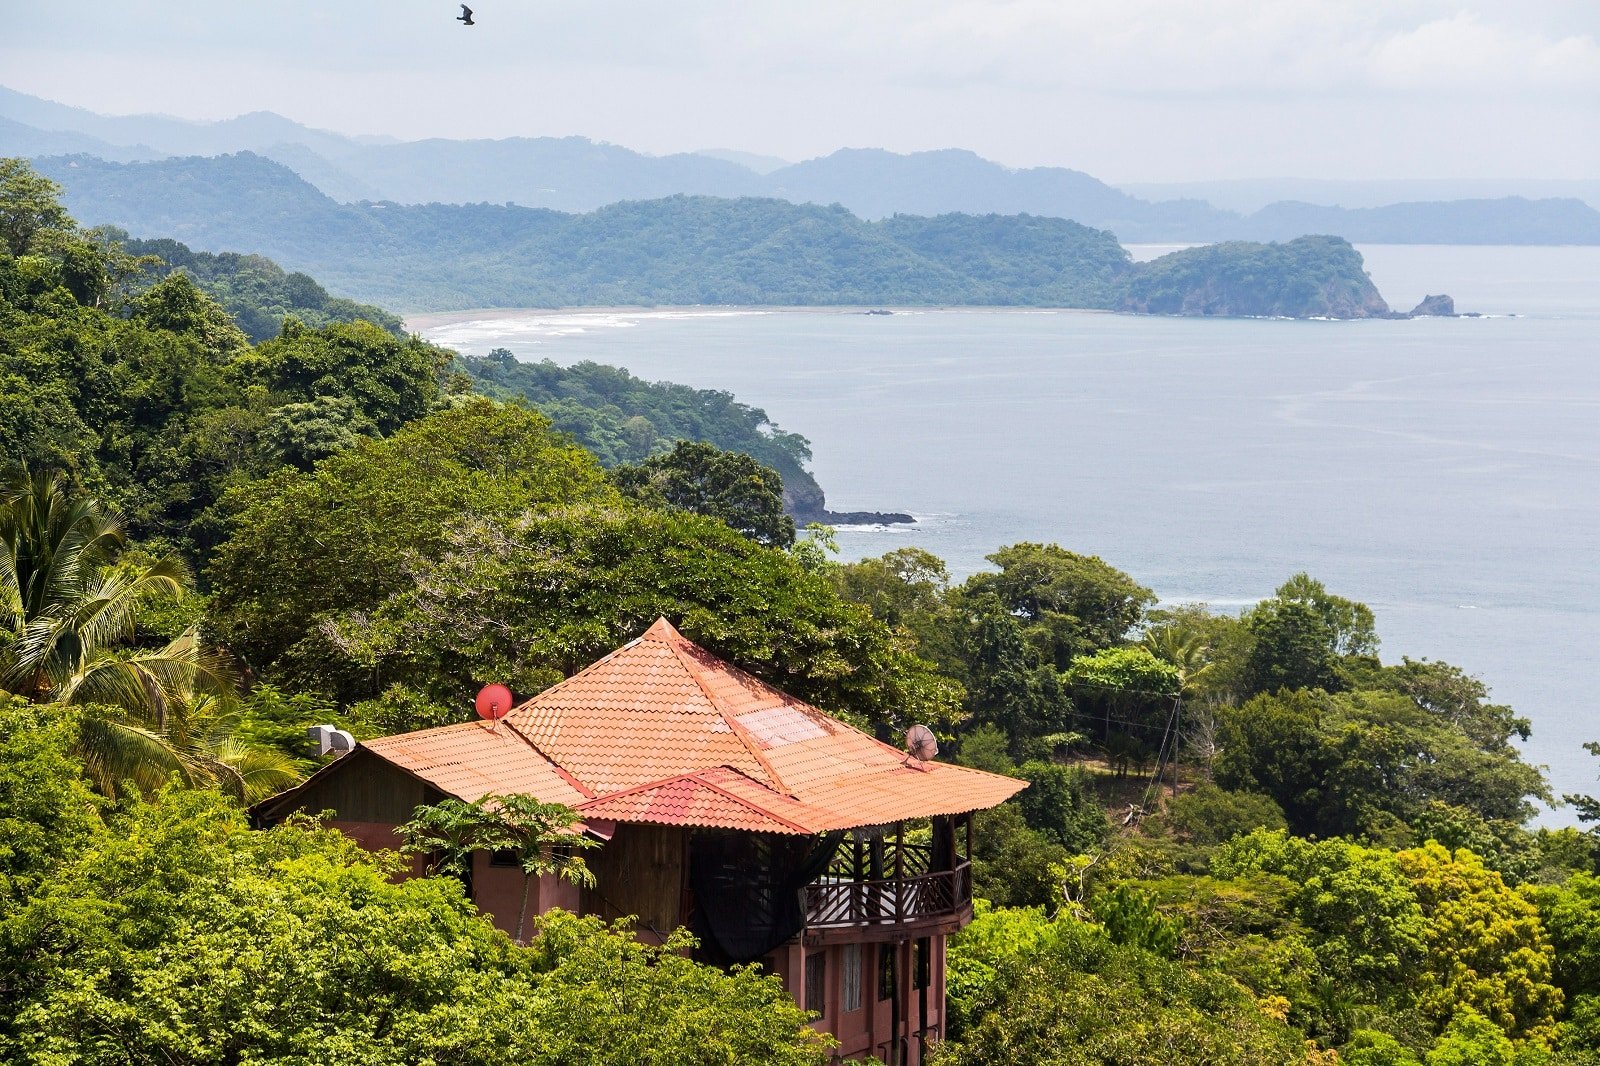 <p><span>With its rich biodiversity and tranquil beaches, Costa Rica is ideal for yoga retreats, especially from December to April. The Nicoya Peninsula, a Blue Zone, is renowned for its wellness-focused lifestyle. Retreats here blend yoga with nature activities like surfing and jungle hikes.</span></p> <p><strong>Blue Spirit Retreat Highlight:</strong></p> <p><span>Located in Nosara, Blue Spirit offers a variety of yoga and meditation retreats in a serene setting overlooking the Pacific Ocean and a three-mile white sand beach.</span></p> <p><b>Insider’s Tip: </b><span>Visit a local coffee plantation to learn about sustainable living practices.</span></p> <p><b>Travel Details: </b><span>Fly into Juan Santamaría International Airport and take a local flight or drive to the Nicoya Peninsula.</span></p>